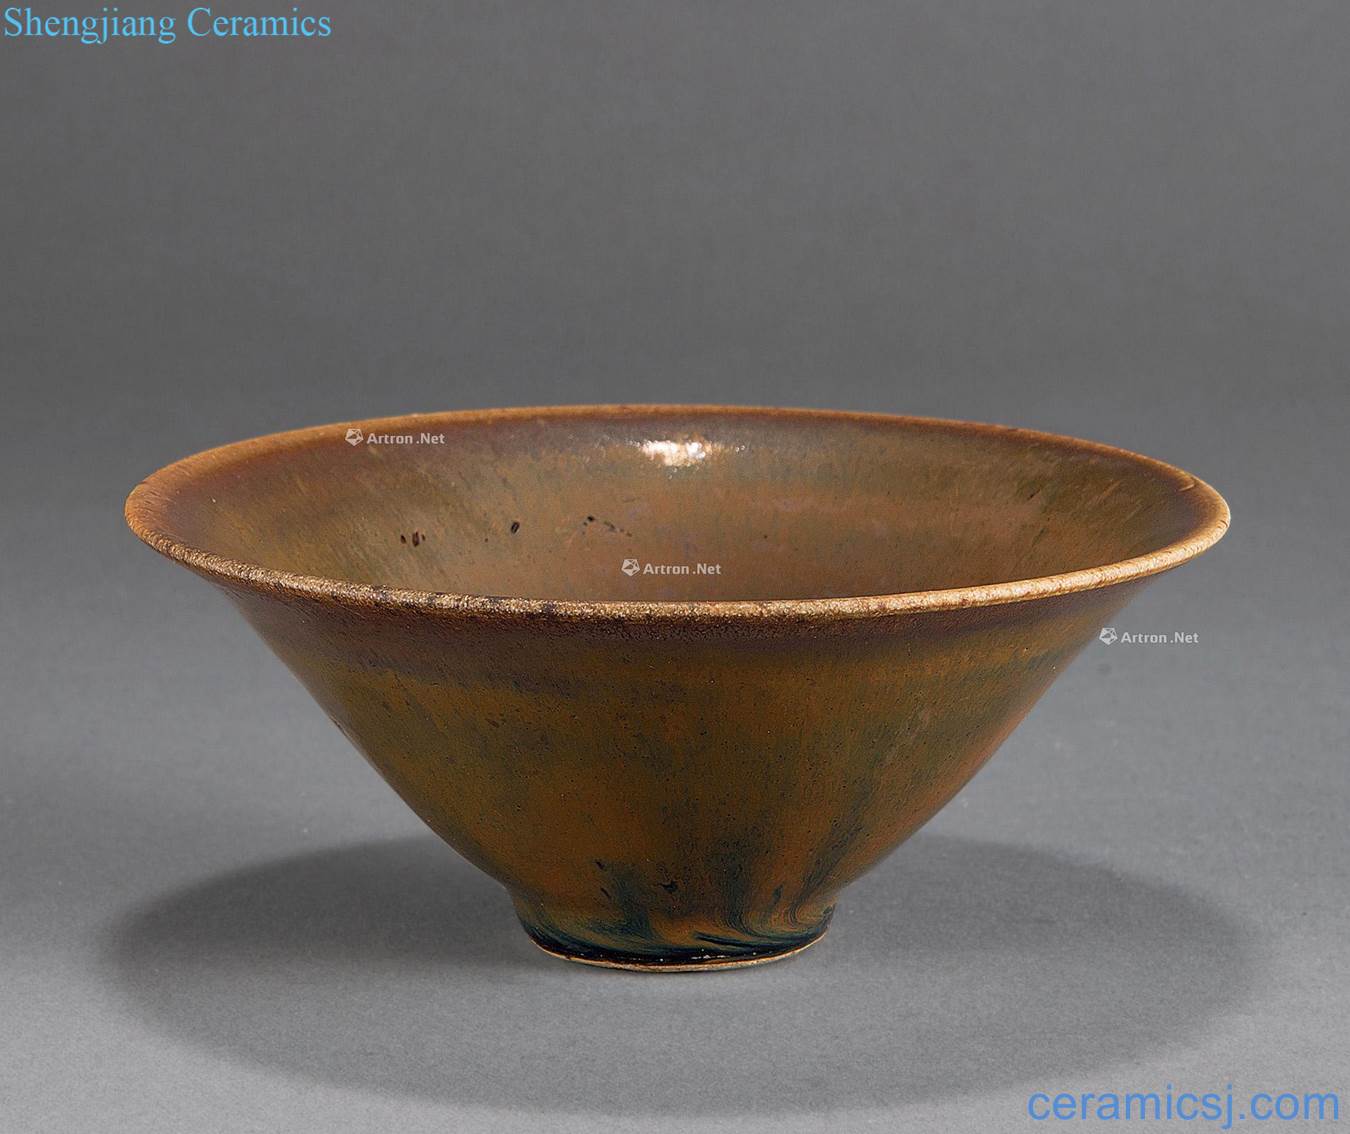 Northern song dynasty yao state kiln persimmon glaze kiln hat to bowl